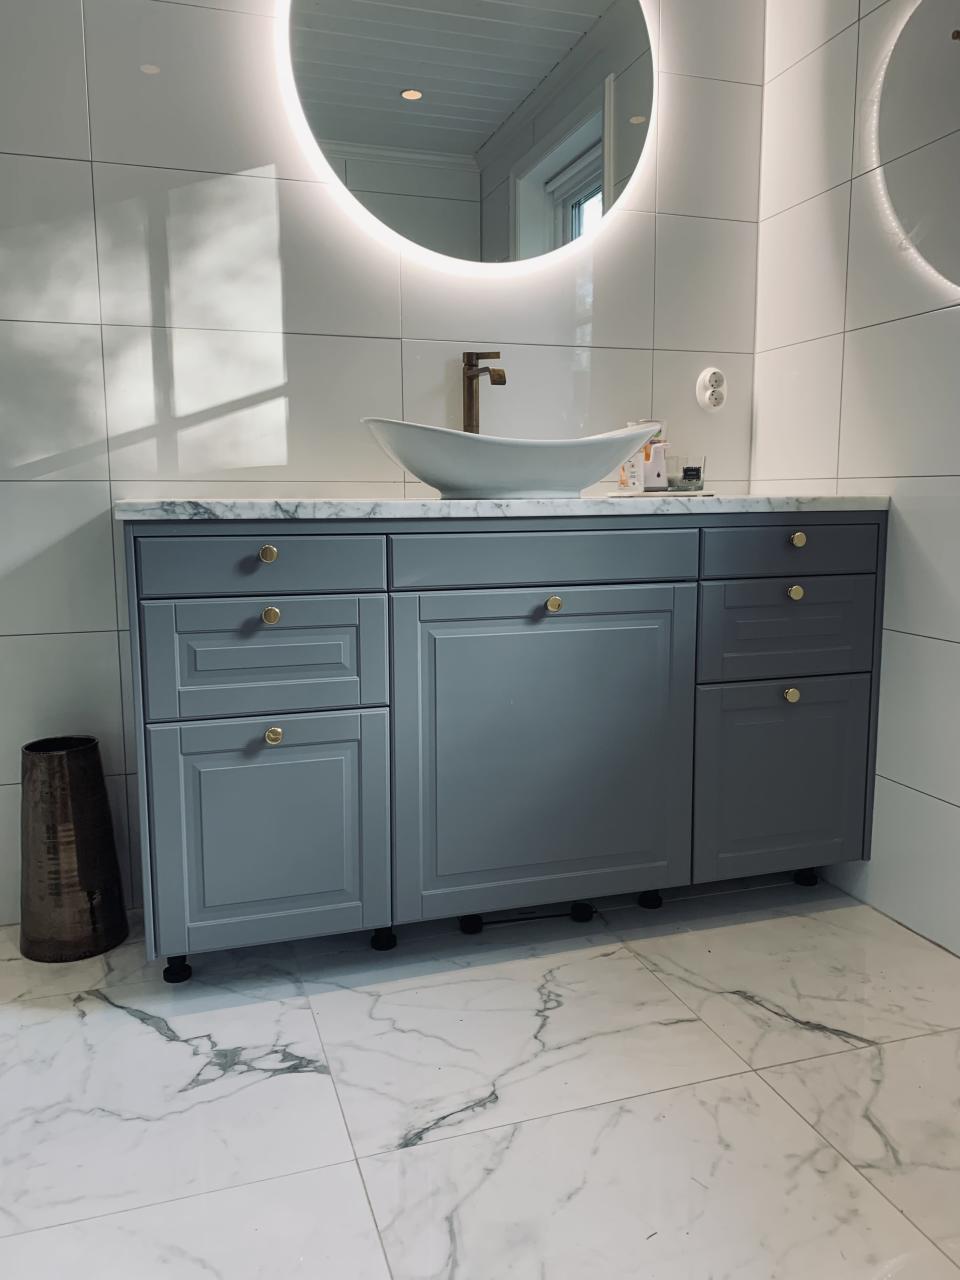 A teal toned bathroom storage unit with multiple drawers